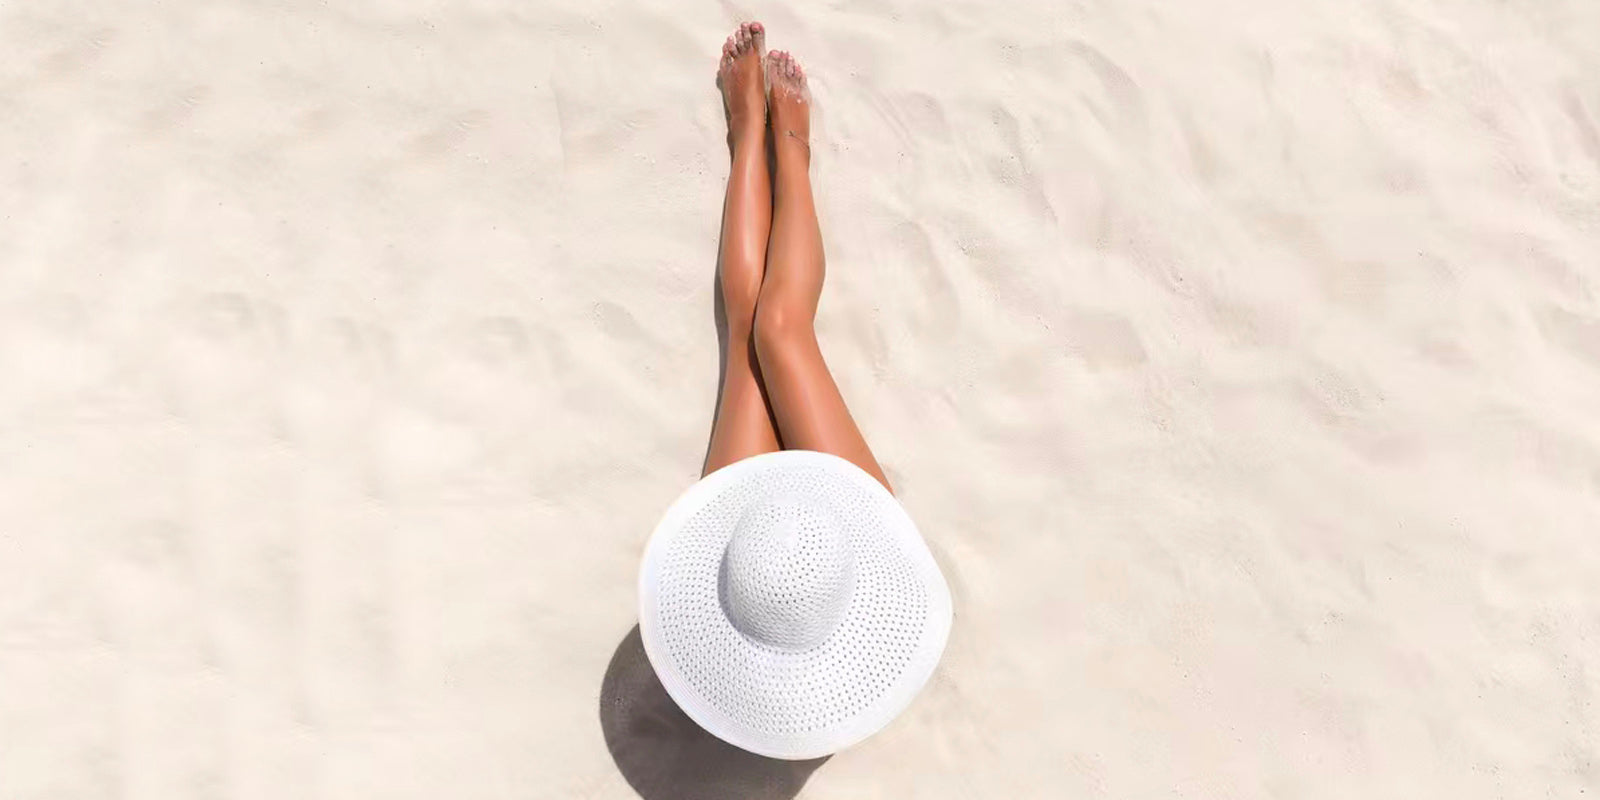 10 Surprising Facts You Didn't Know about IPL Hair Removal